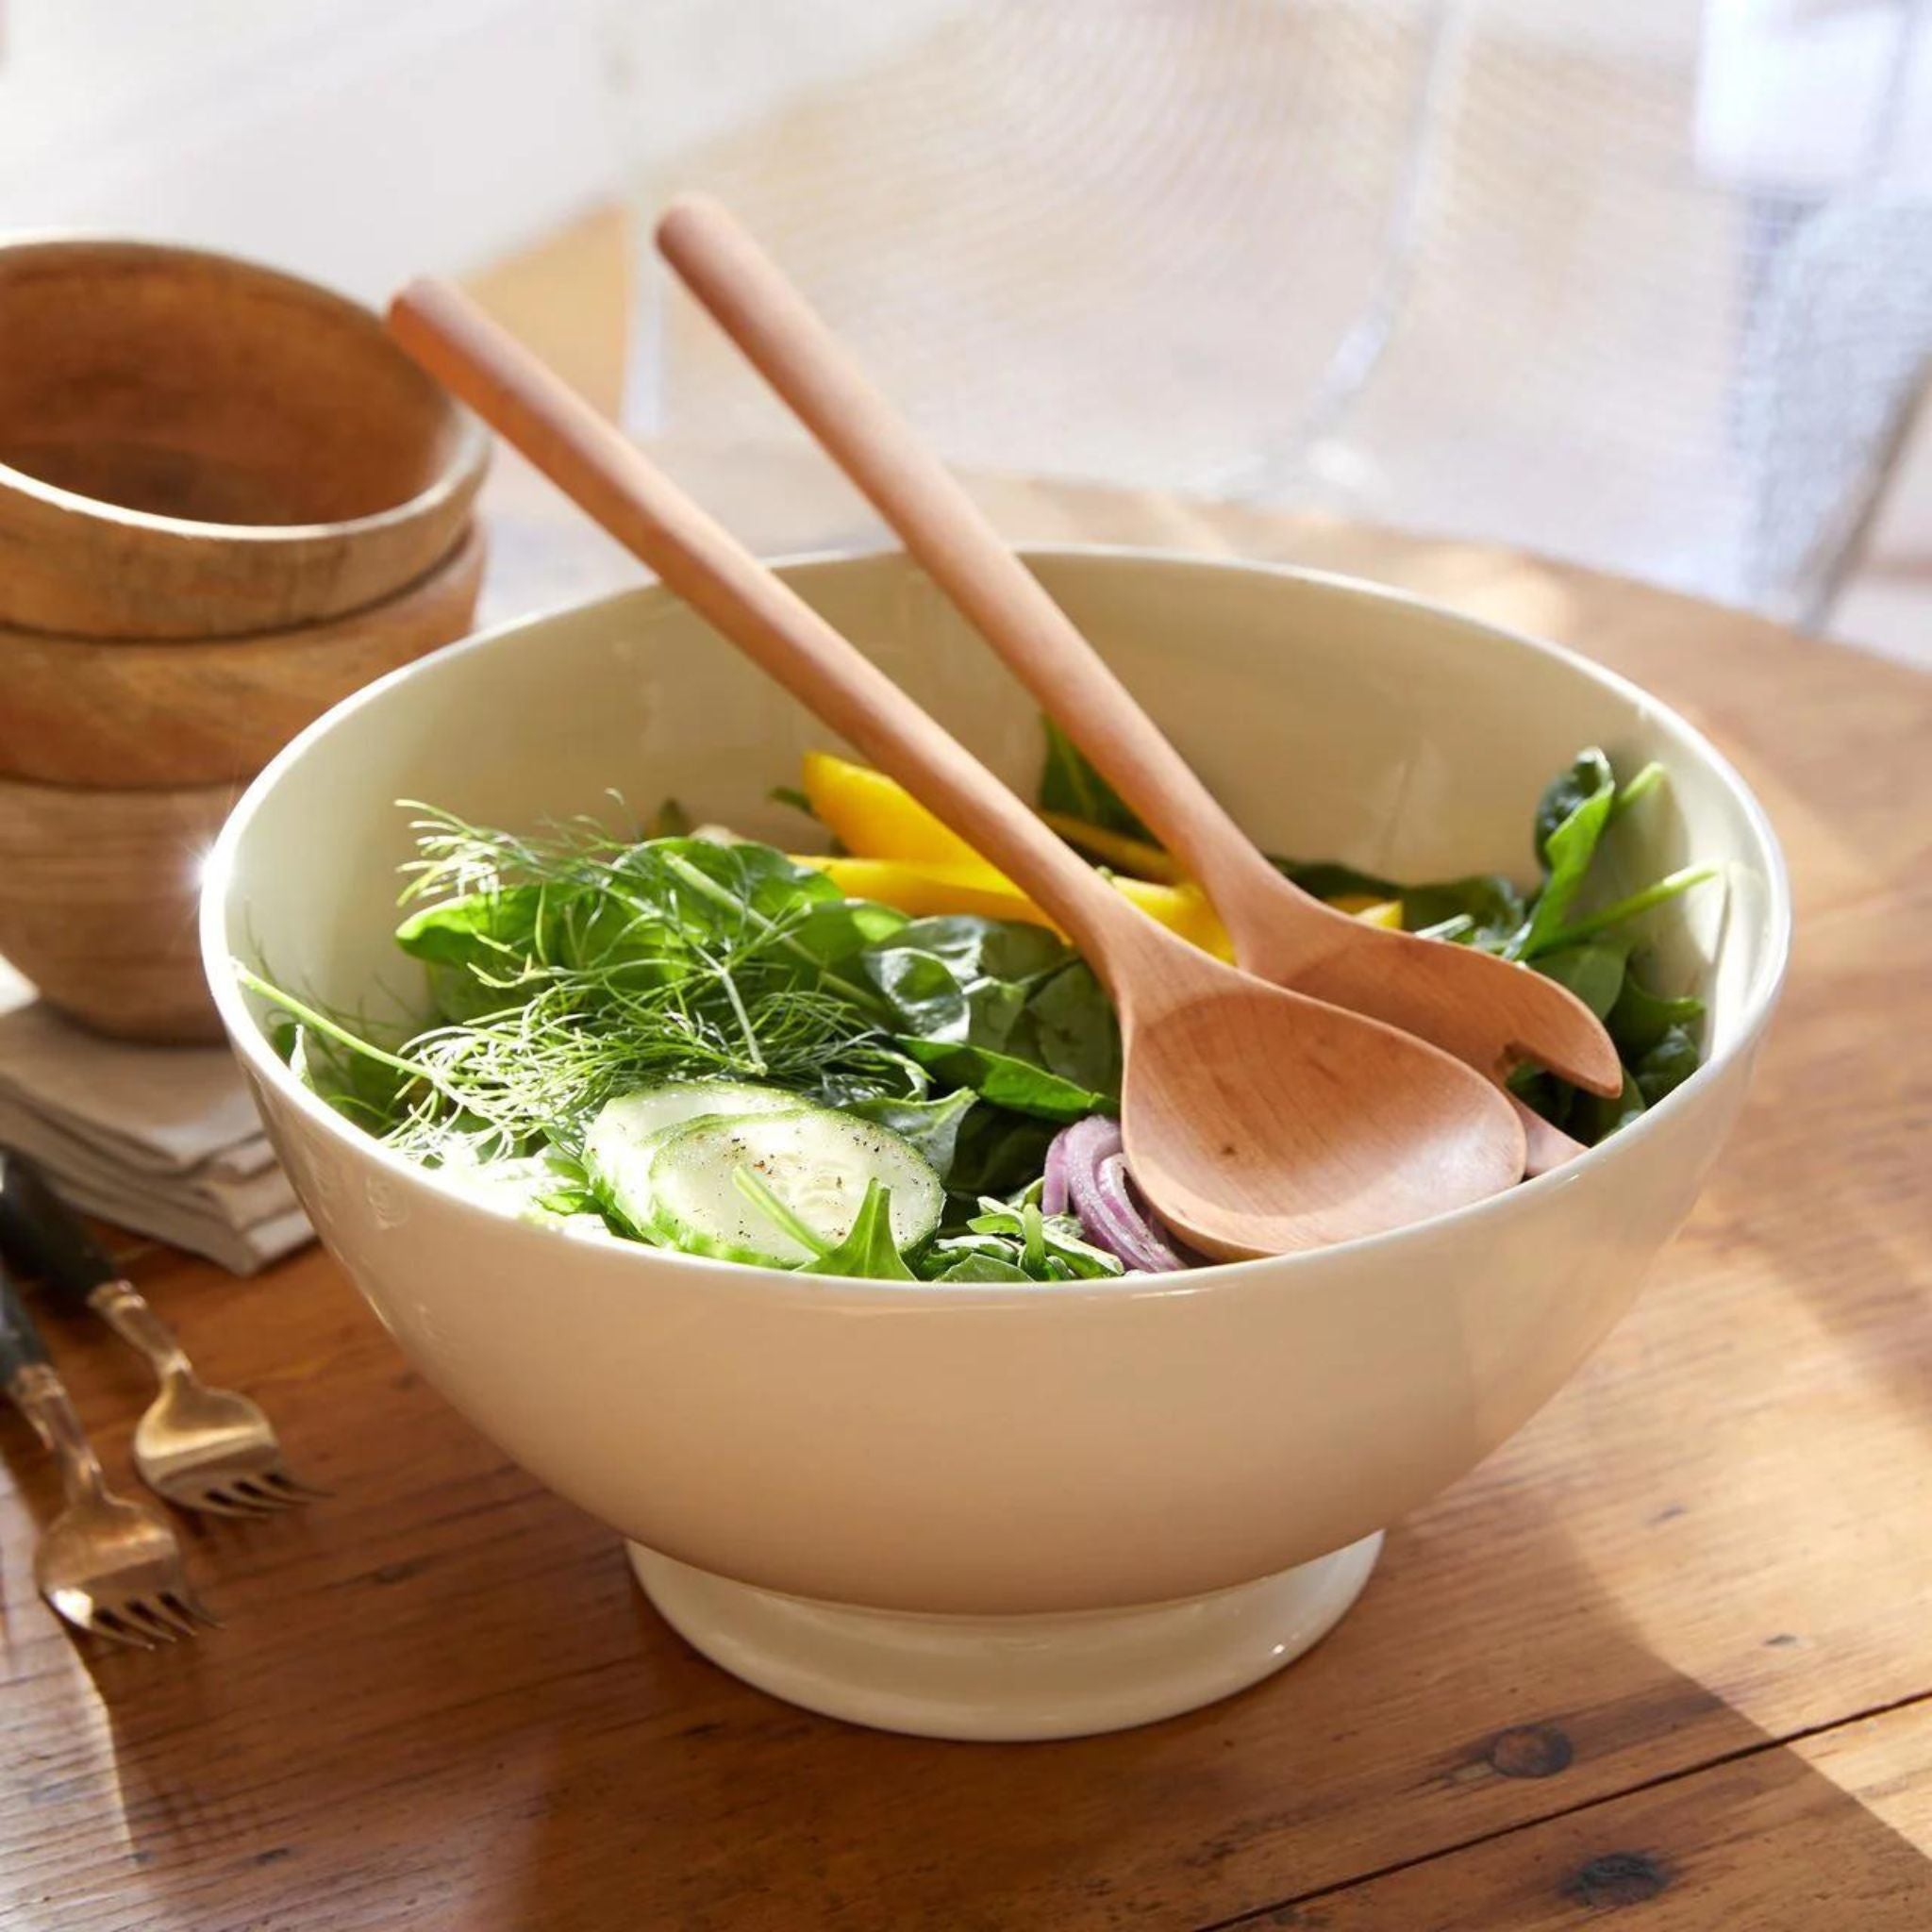 Simply Elevated - Beechwood Salad Server Turn any group gathering into a stylish party with these wooden salad servers. They're a timeless look you can mix and match with any serving bowl!